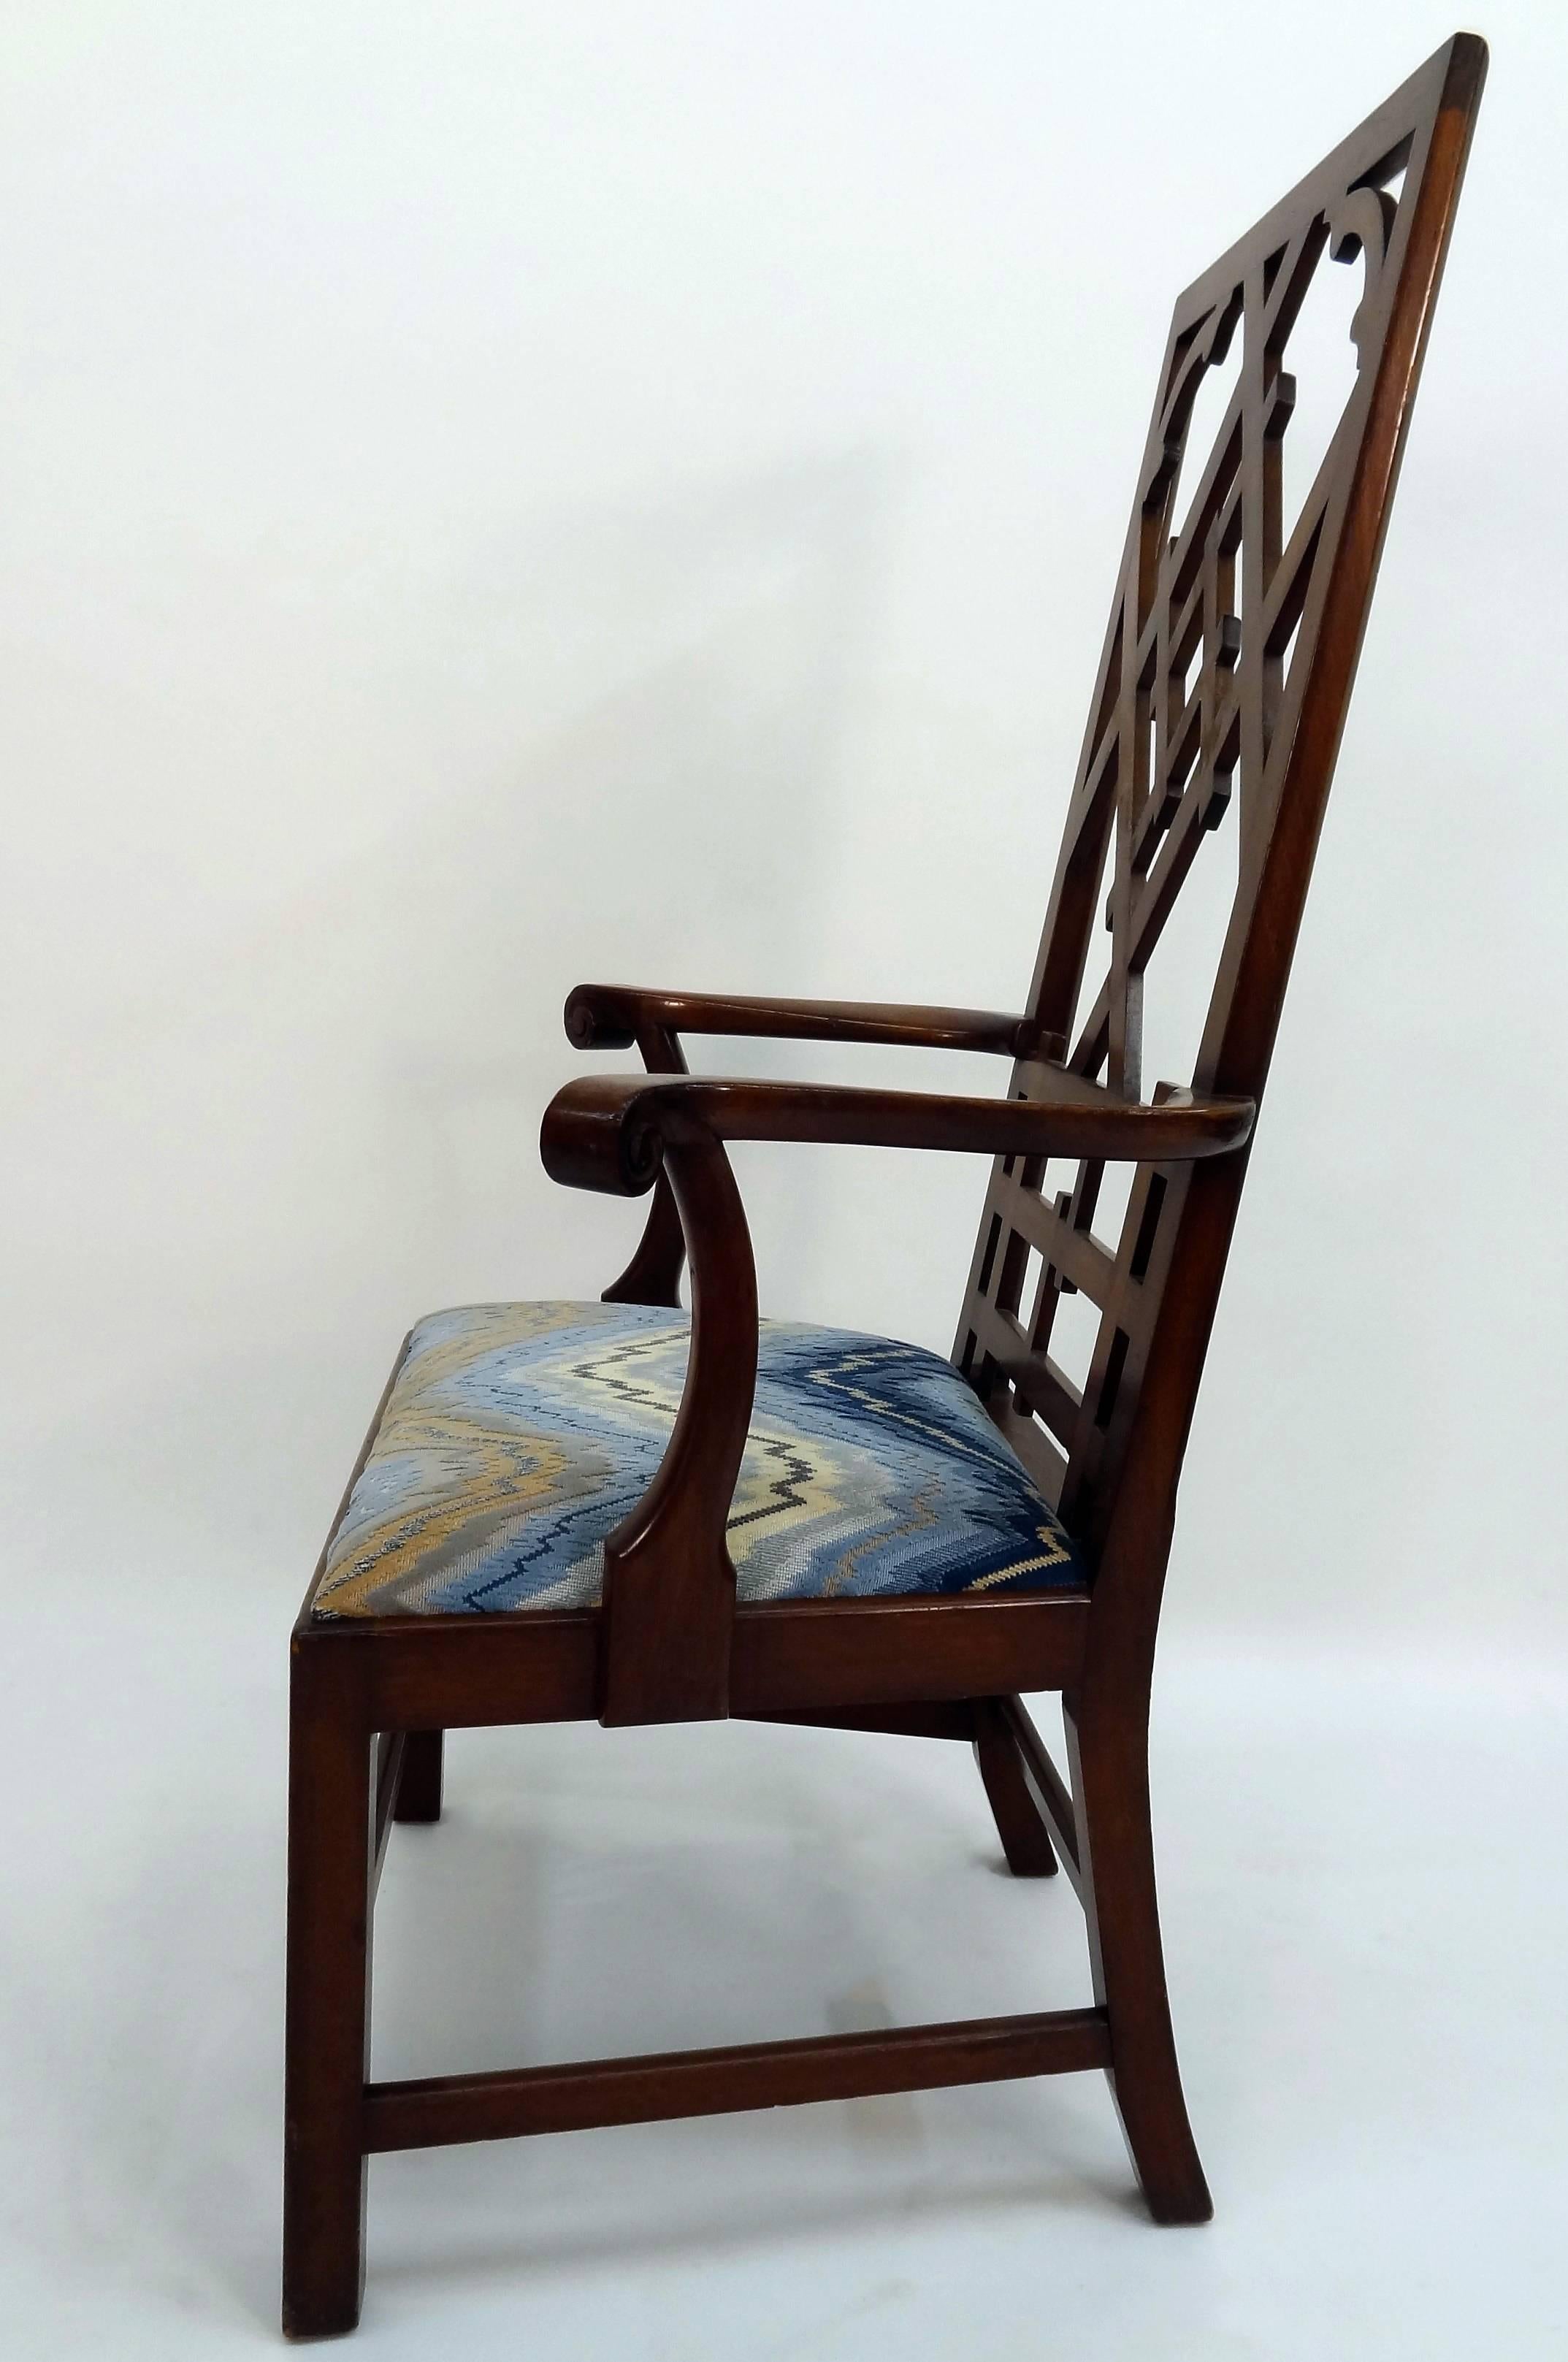 Chippendale Style Fretwork High Back Chair In Excellent Condition For Sale In Long Island City, NY